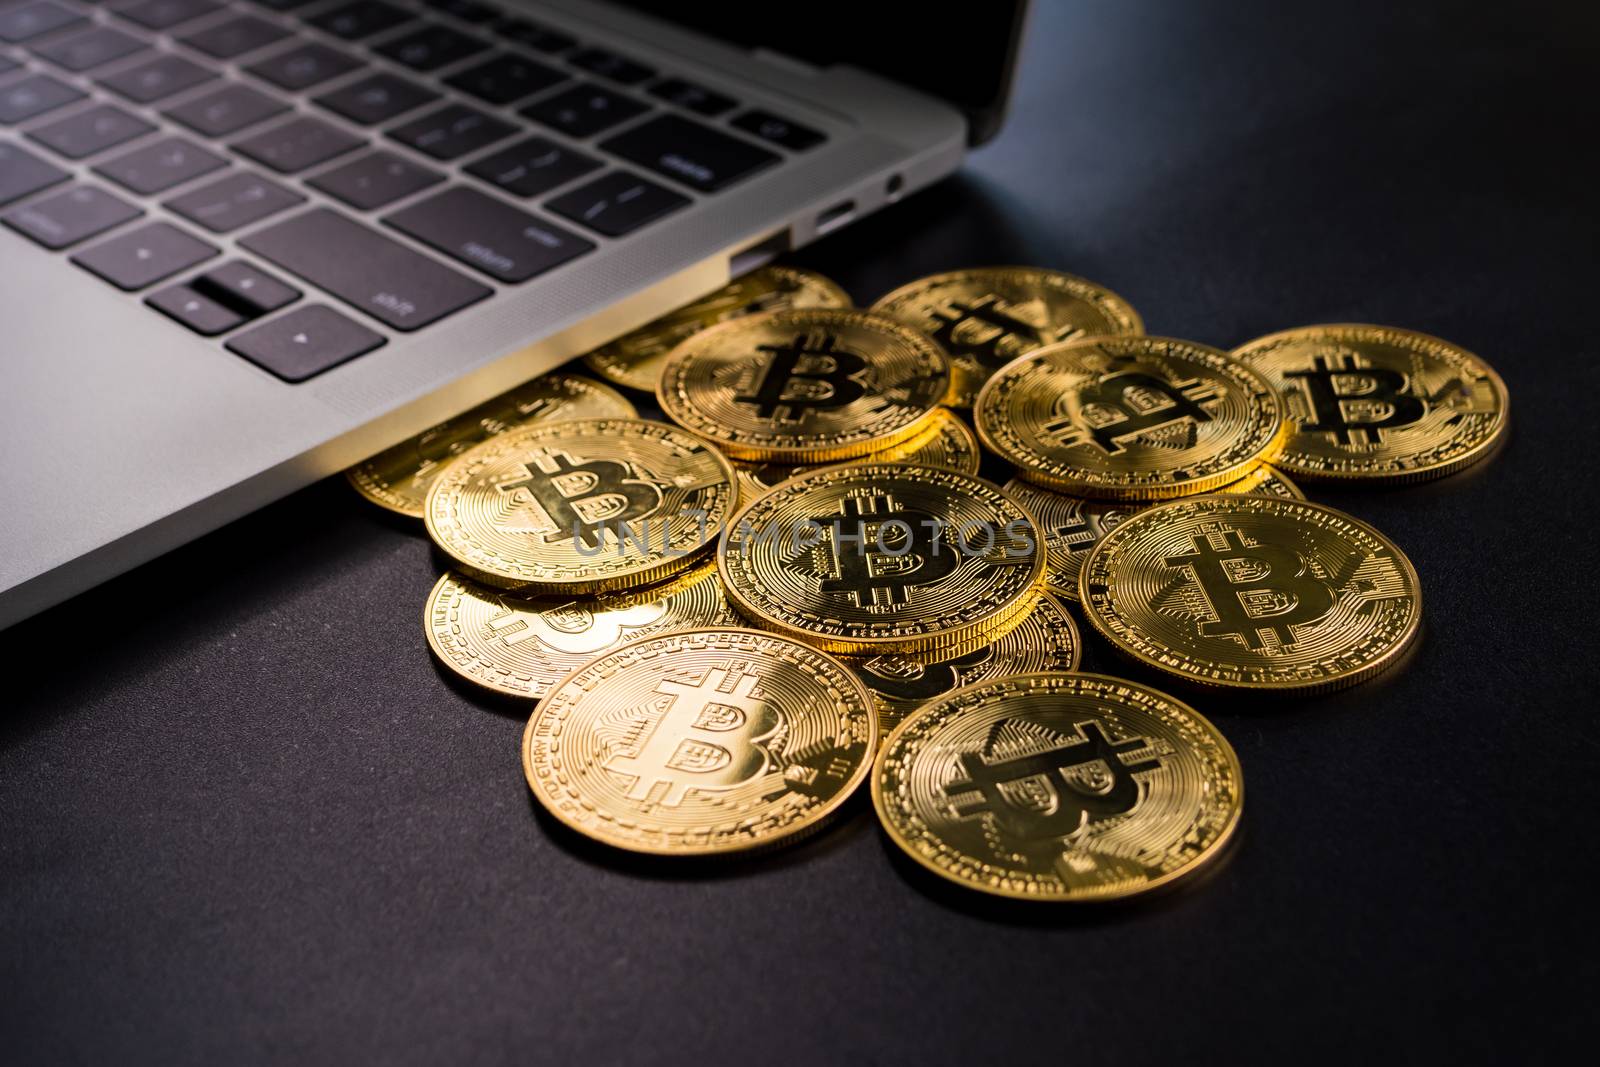 Computer and golden coins with bitcoin symbol on a black backgro by ronnarong